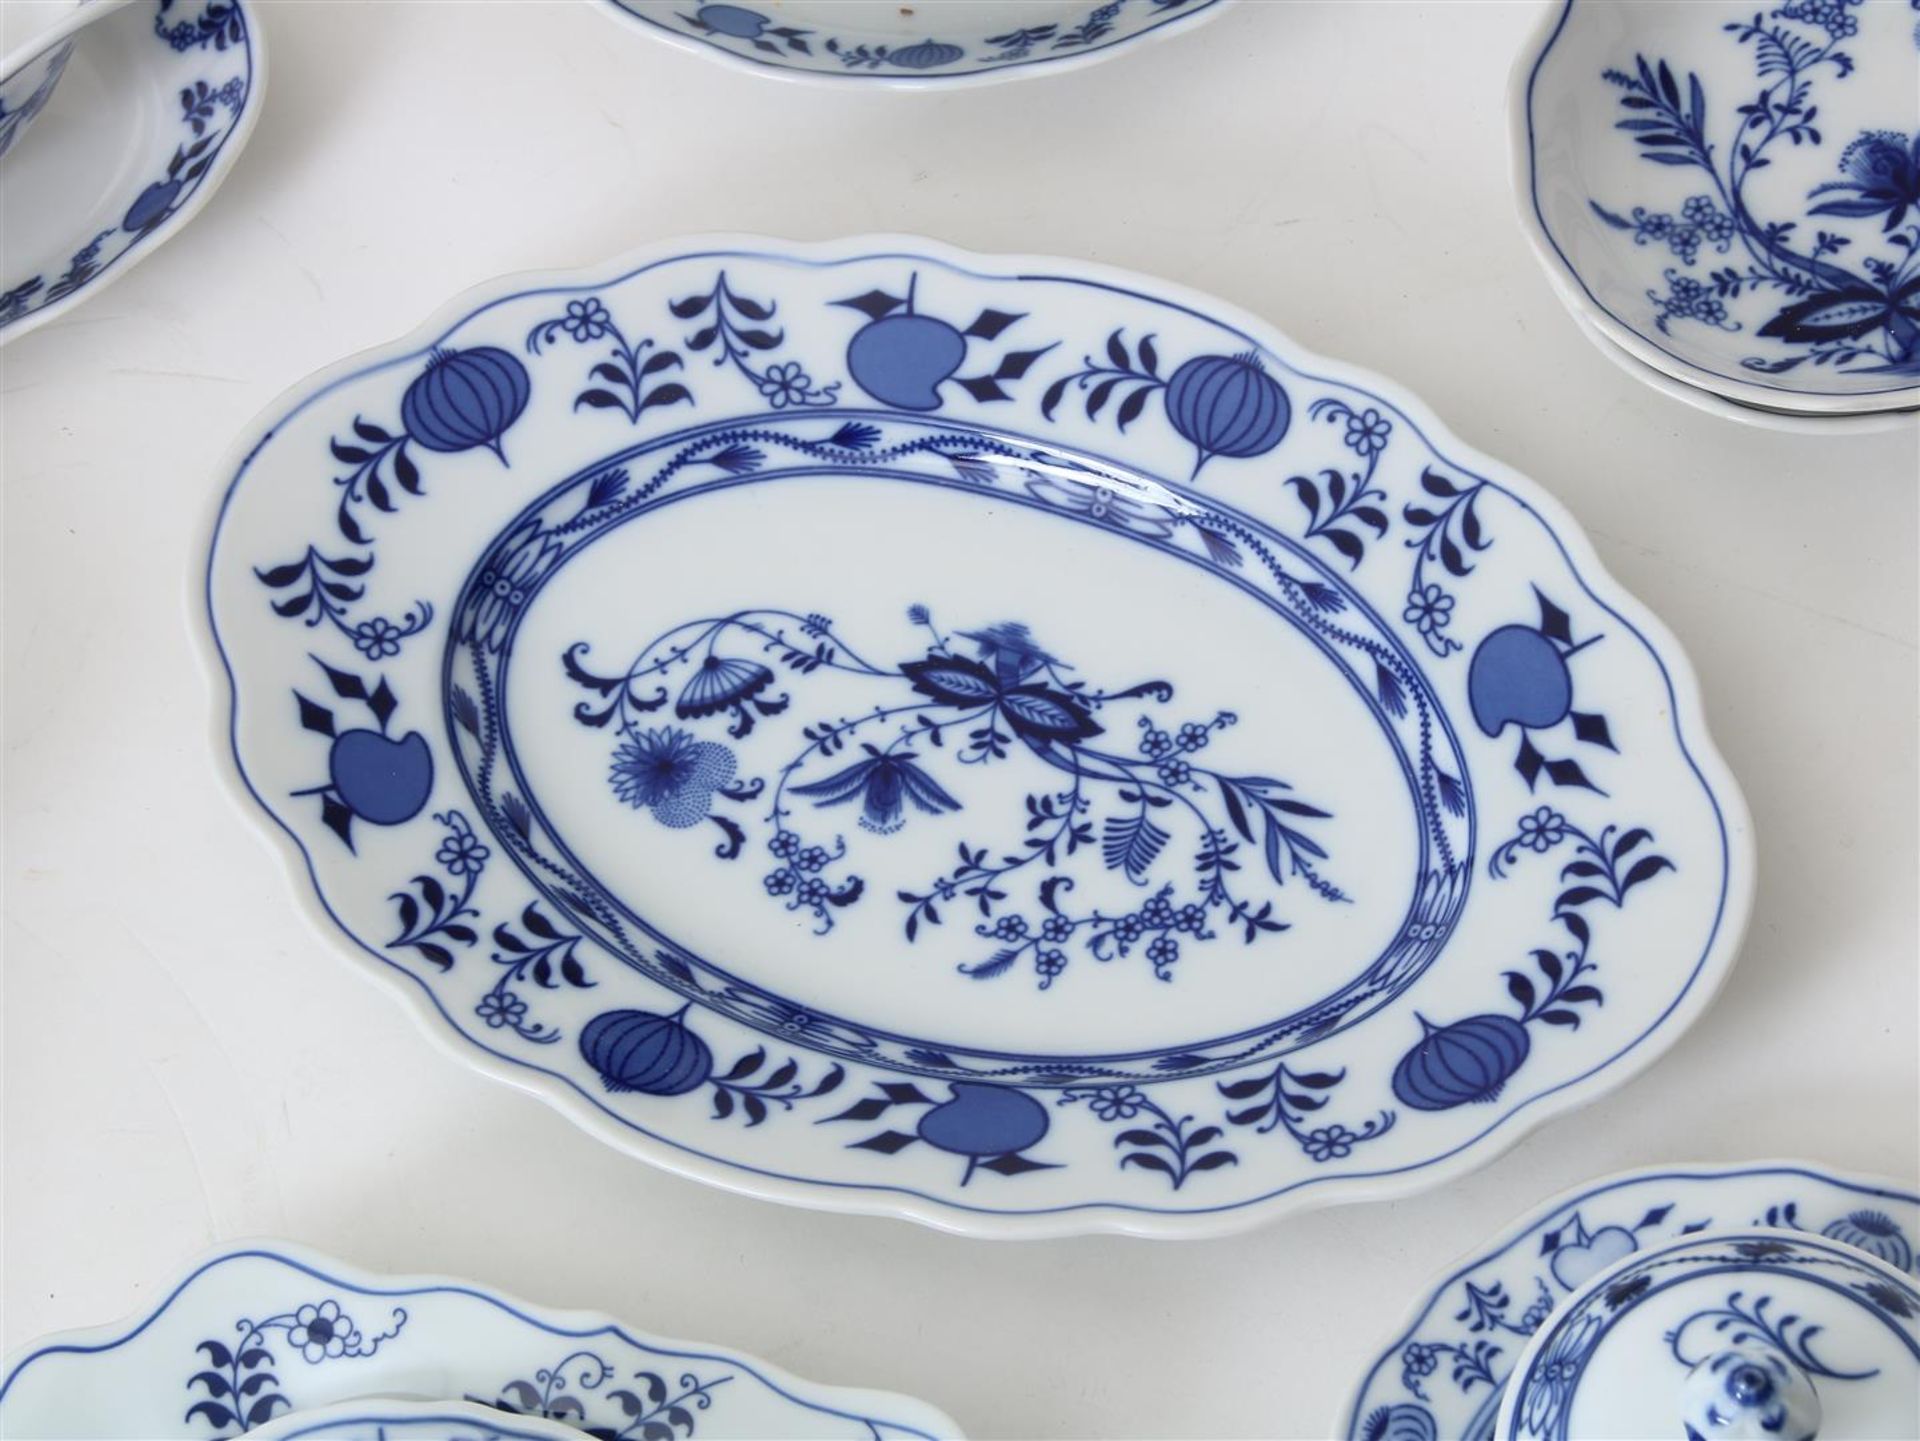 Approximately 50 pieces of porcelain tableware with zwiebelmuster decor, including bowls, - Image 6 of 9